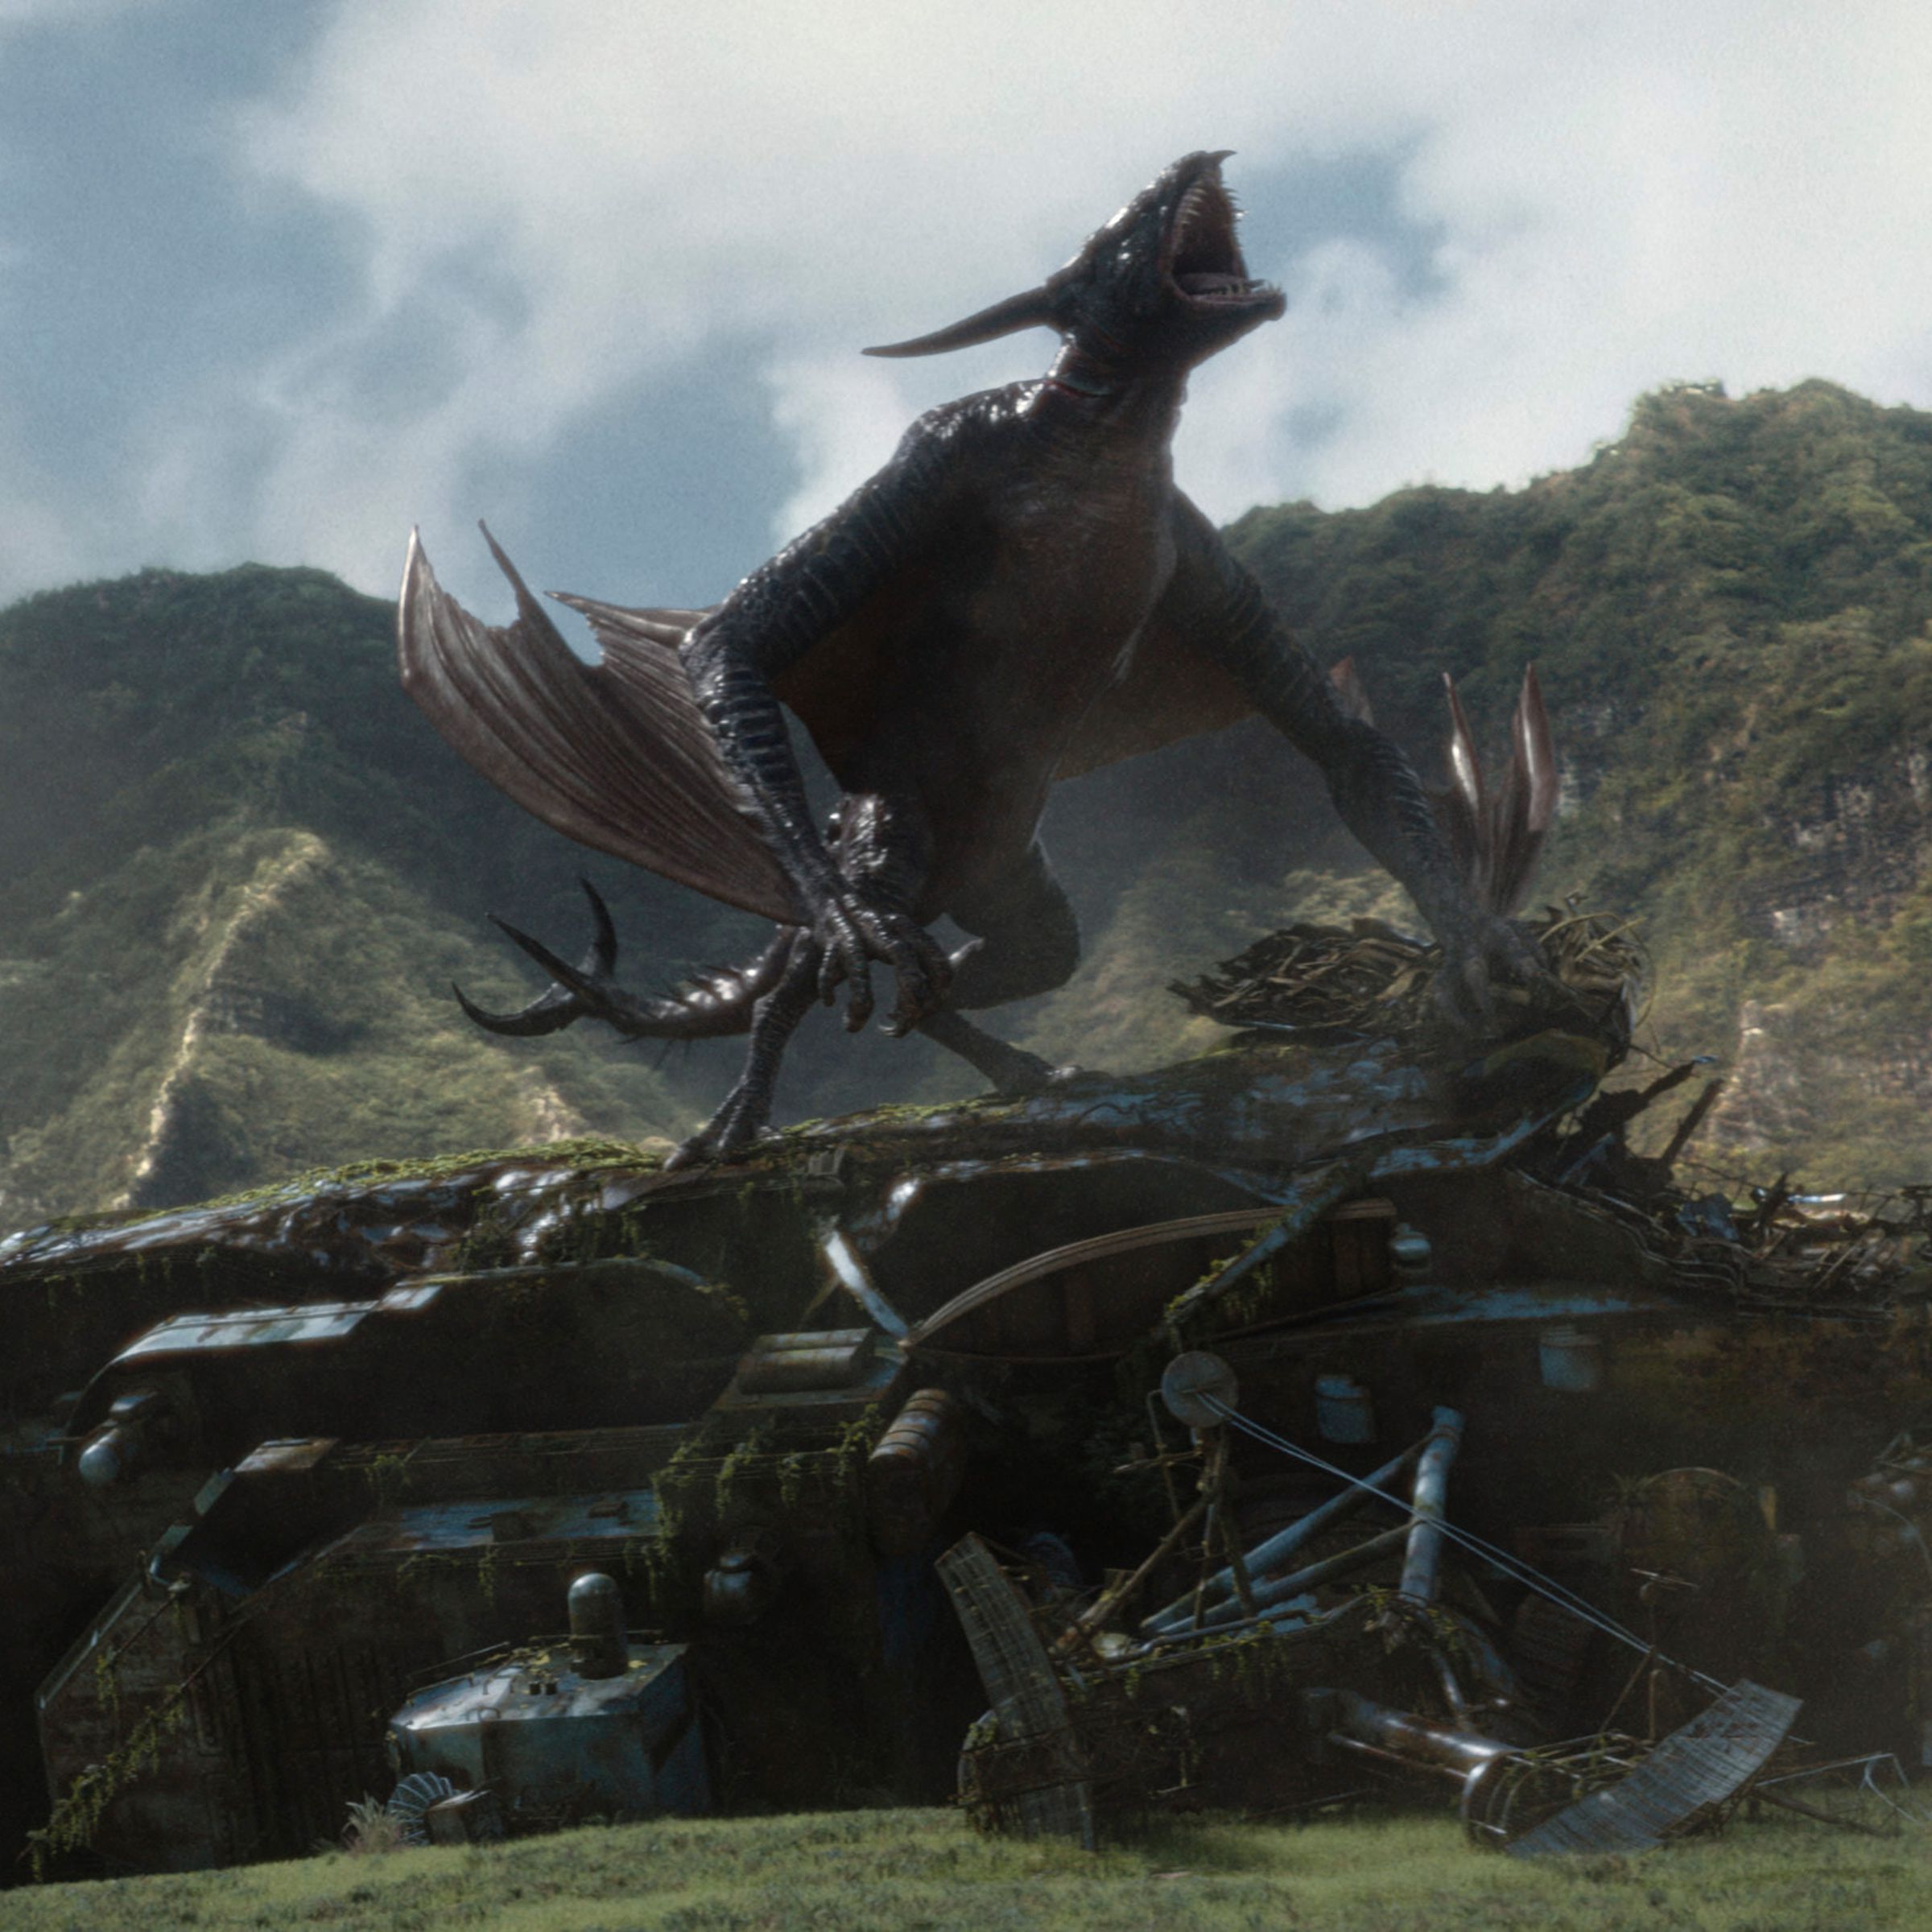 A winged dinosaur-like creature sitting atop the ruins of a wrecked building.